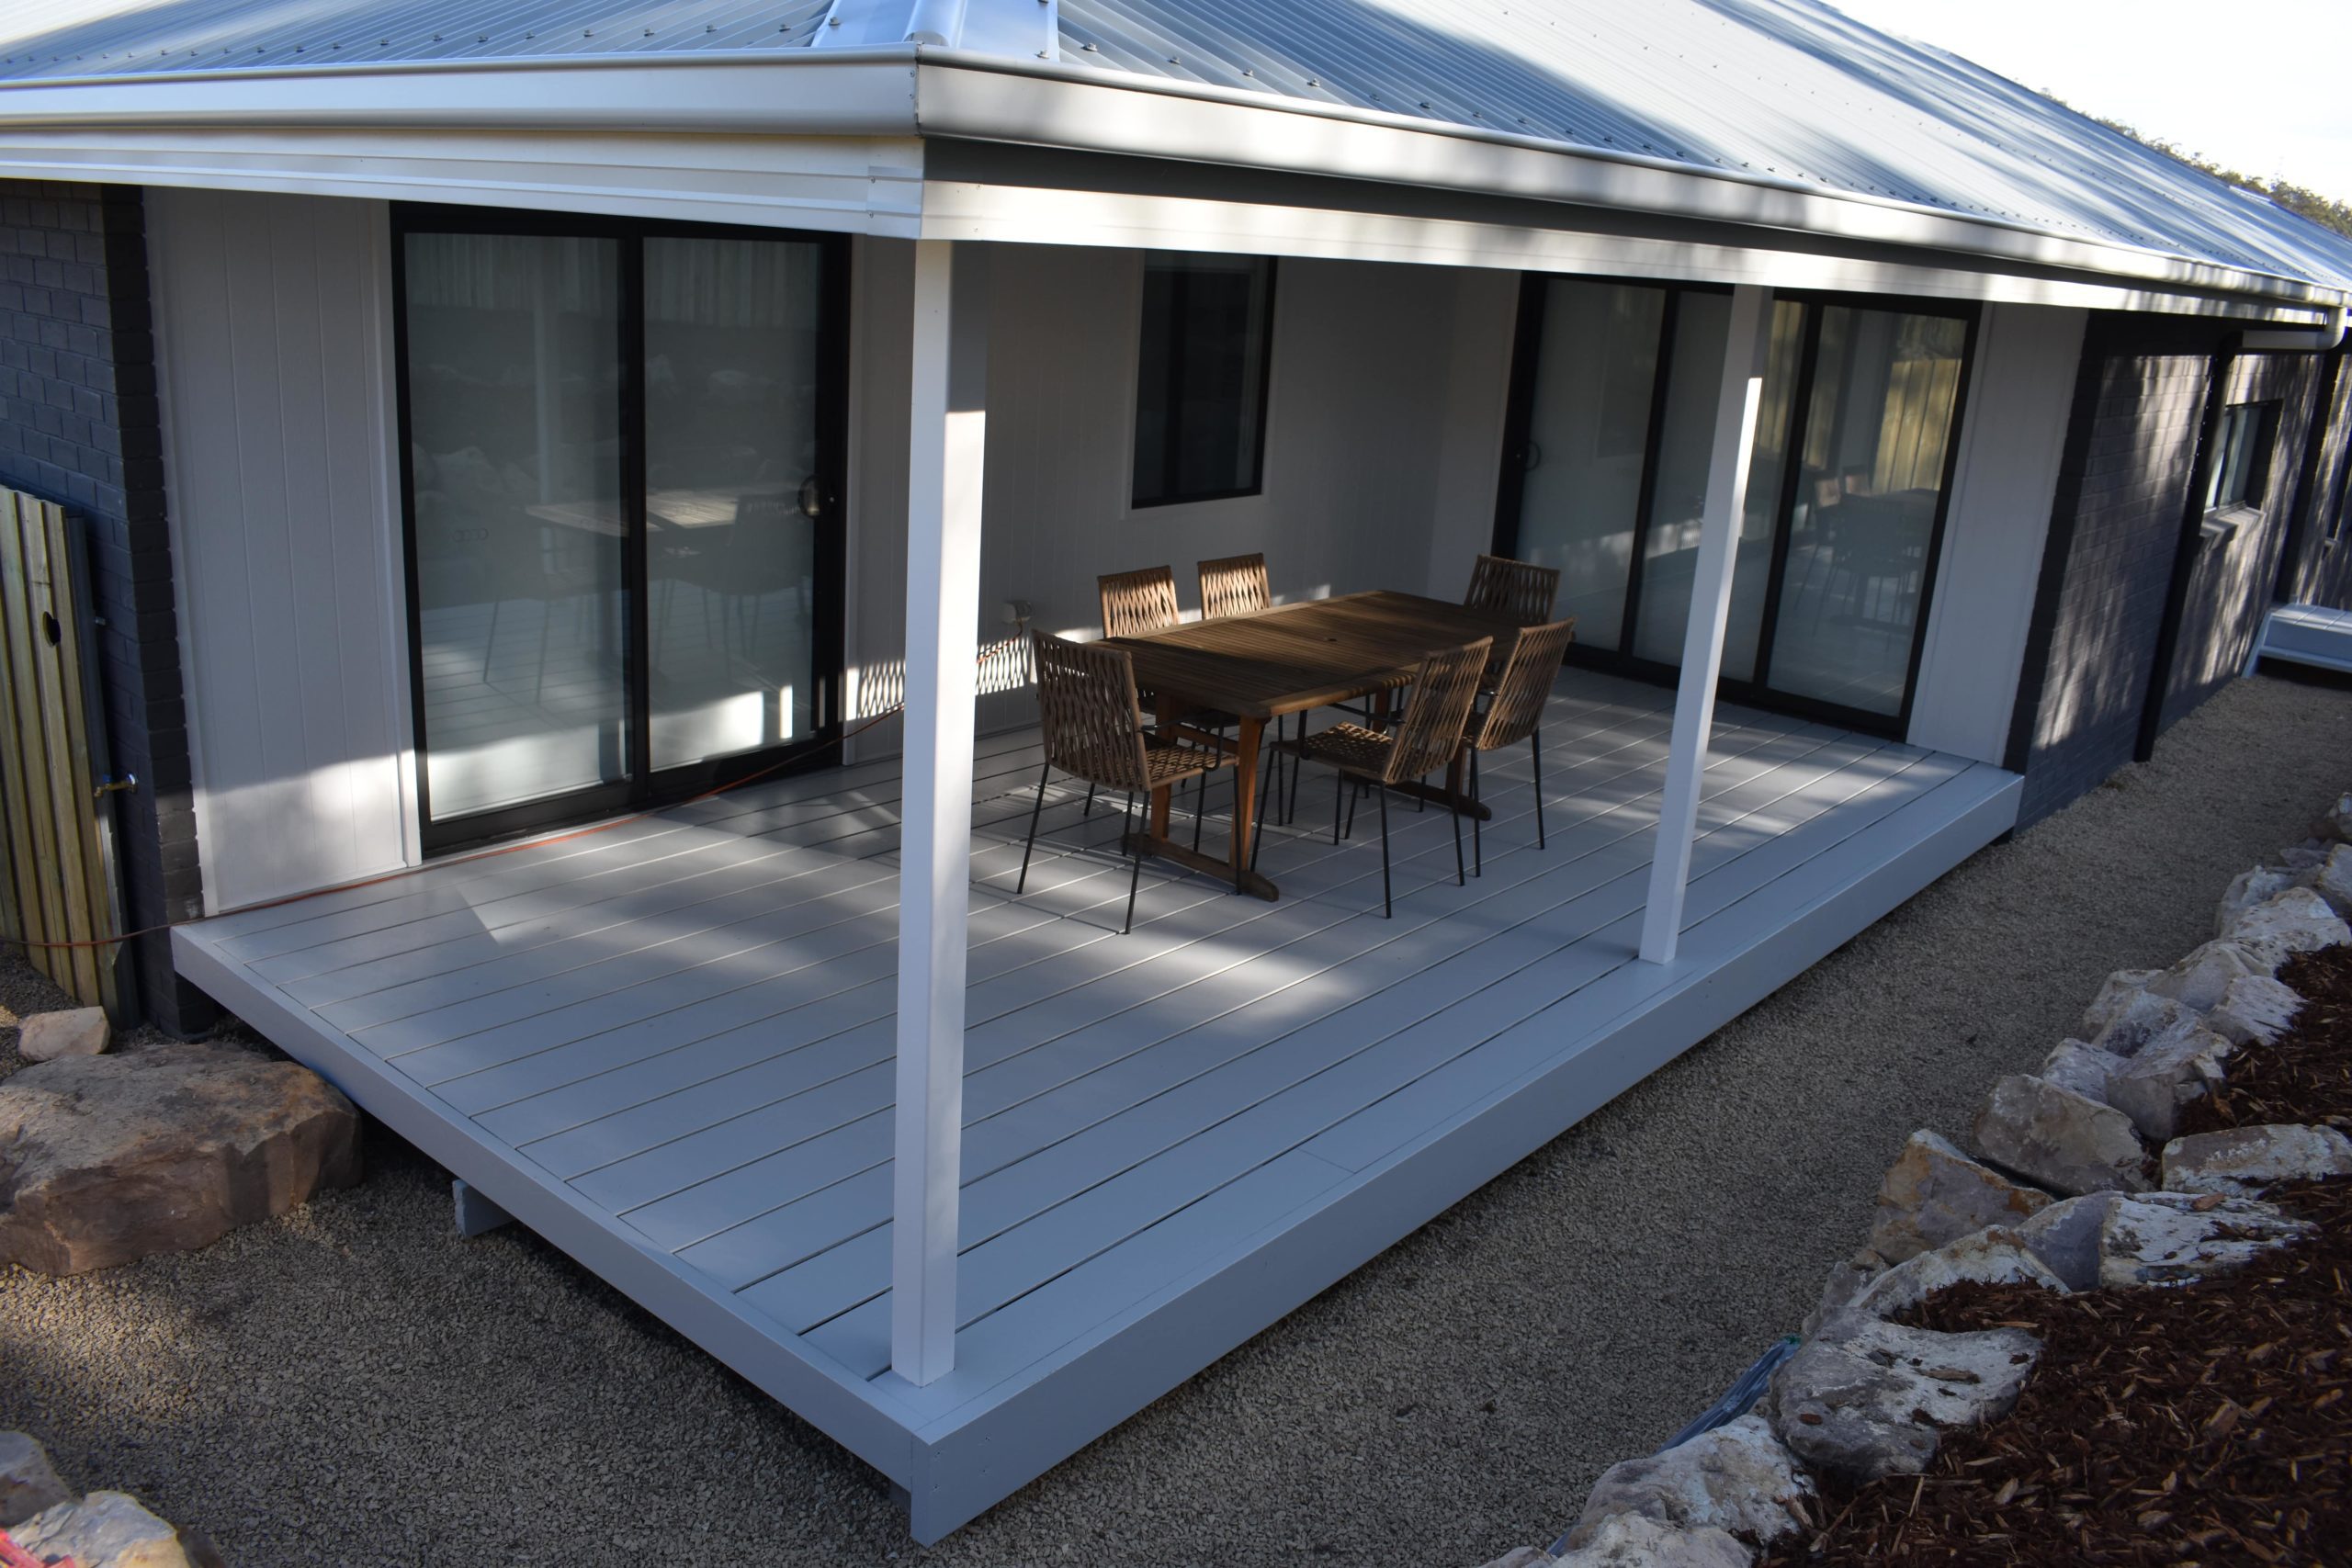 Cavalier Homes Display Home Deck - Products supplied by Clennett's Mitre 10